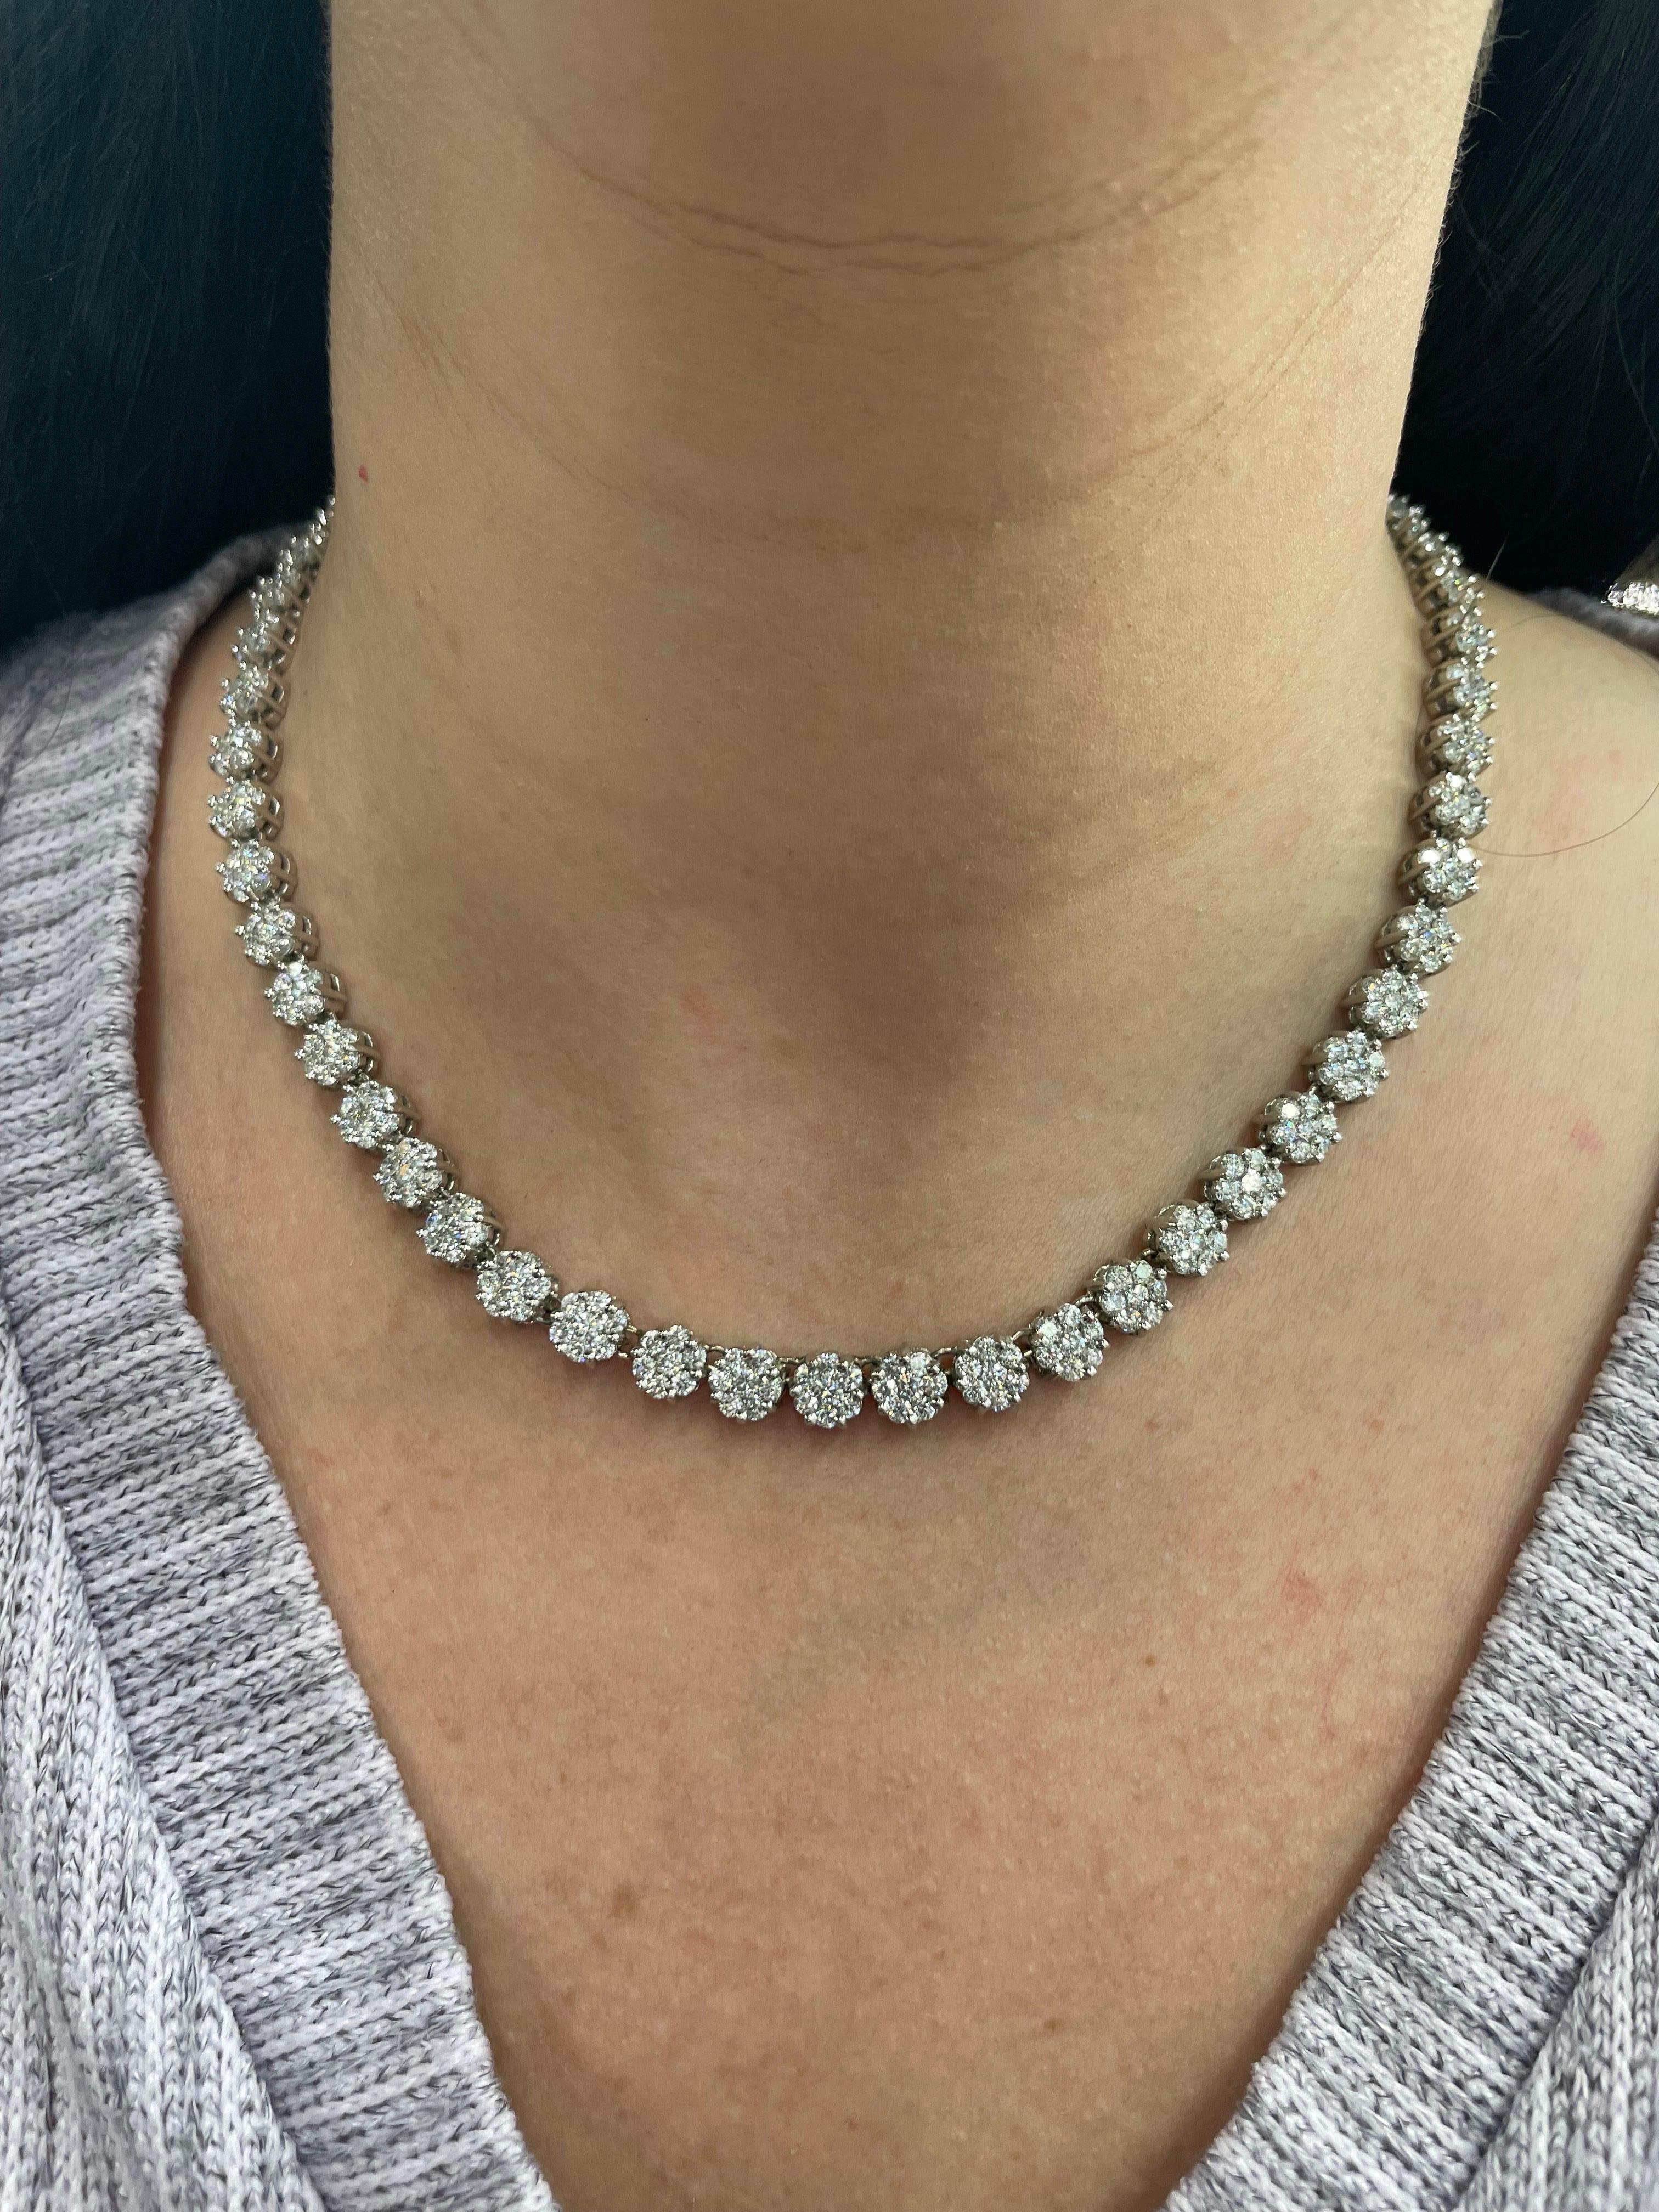 14 Karat White Gold tennis necklace featuring 52 clusters weighing approximately 20 carats.
Color H
Clarity SI
Big look on the neck! 